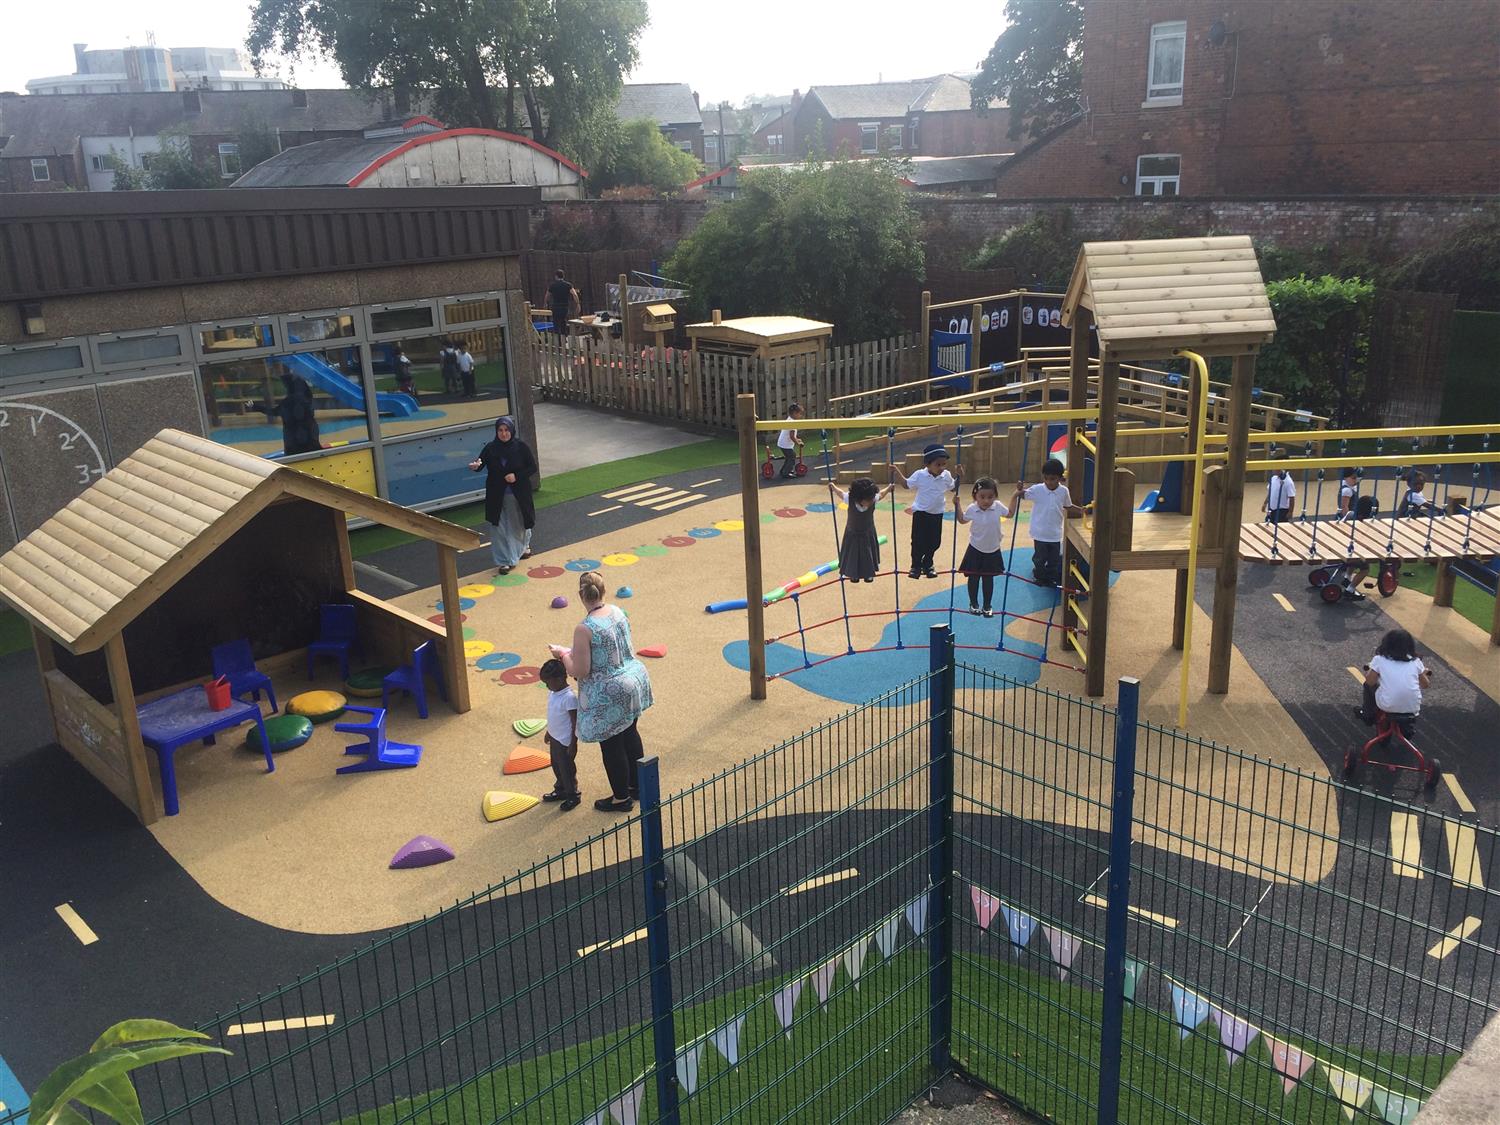 The outside play equipment at St Chrysostom's C of E Primary School.